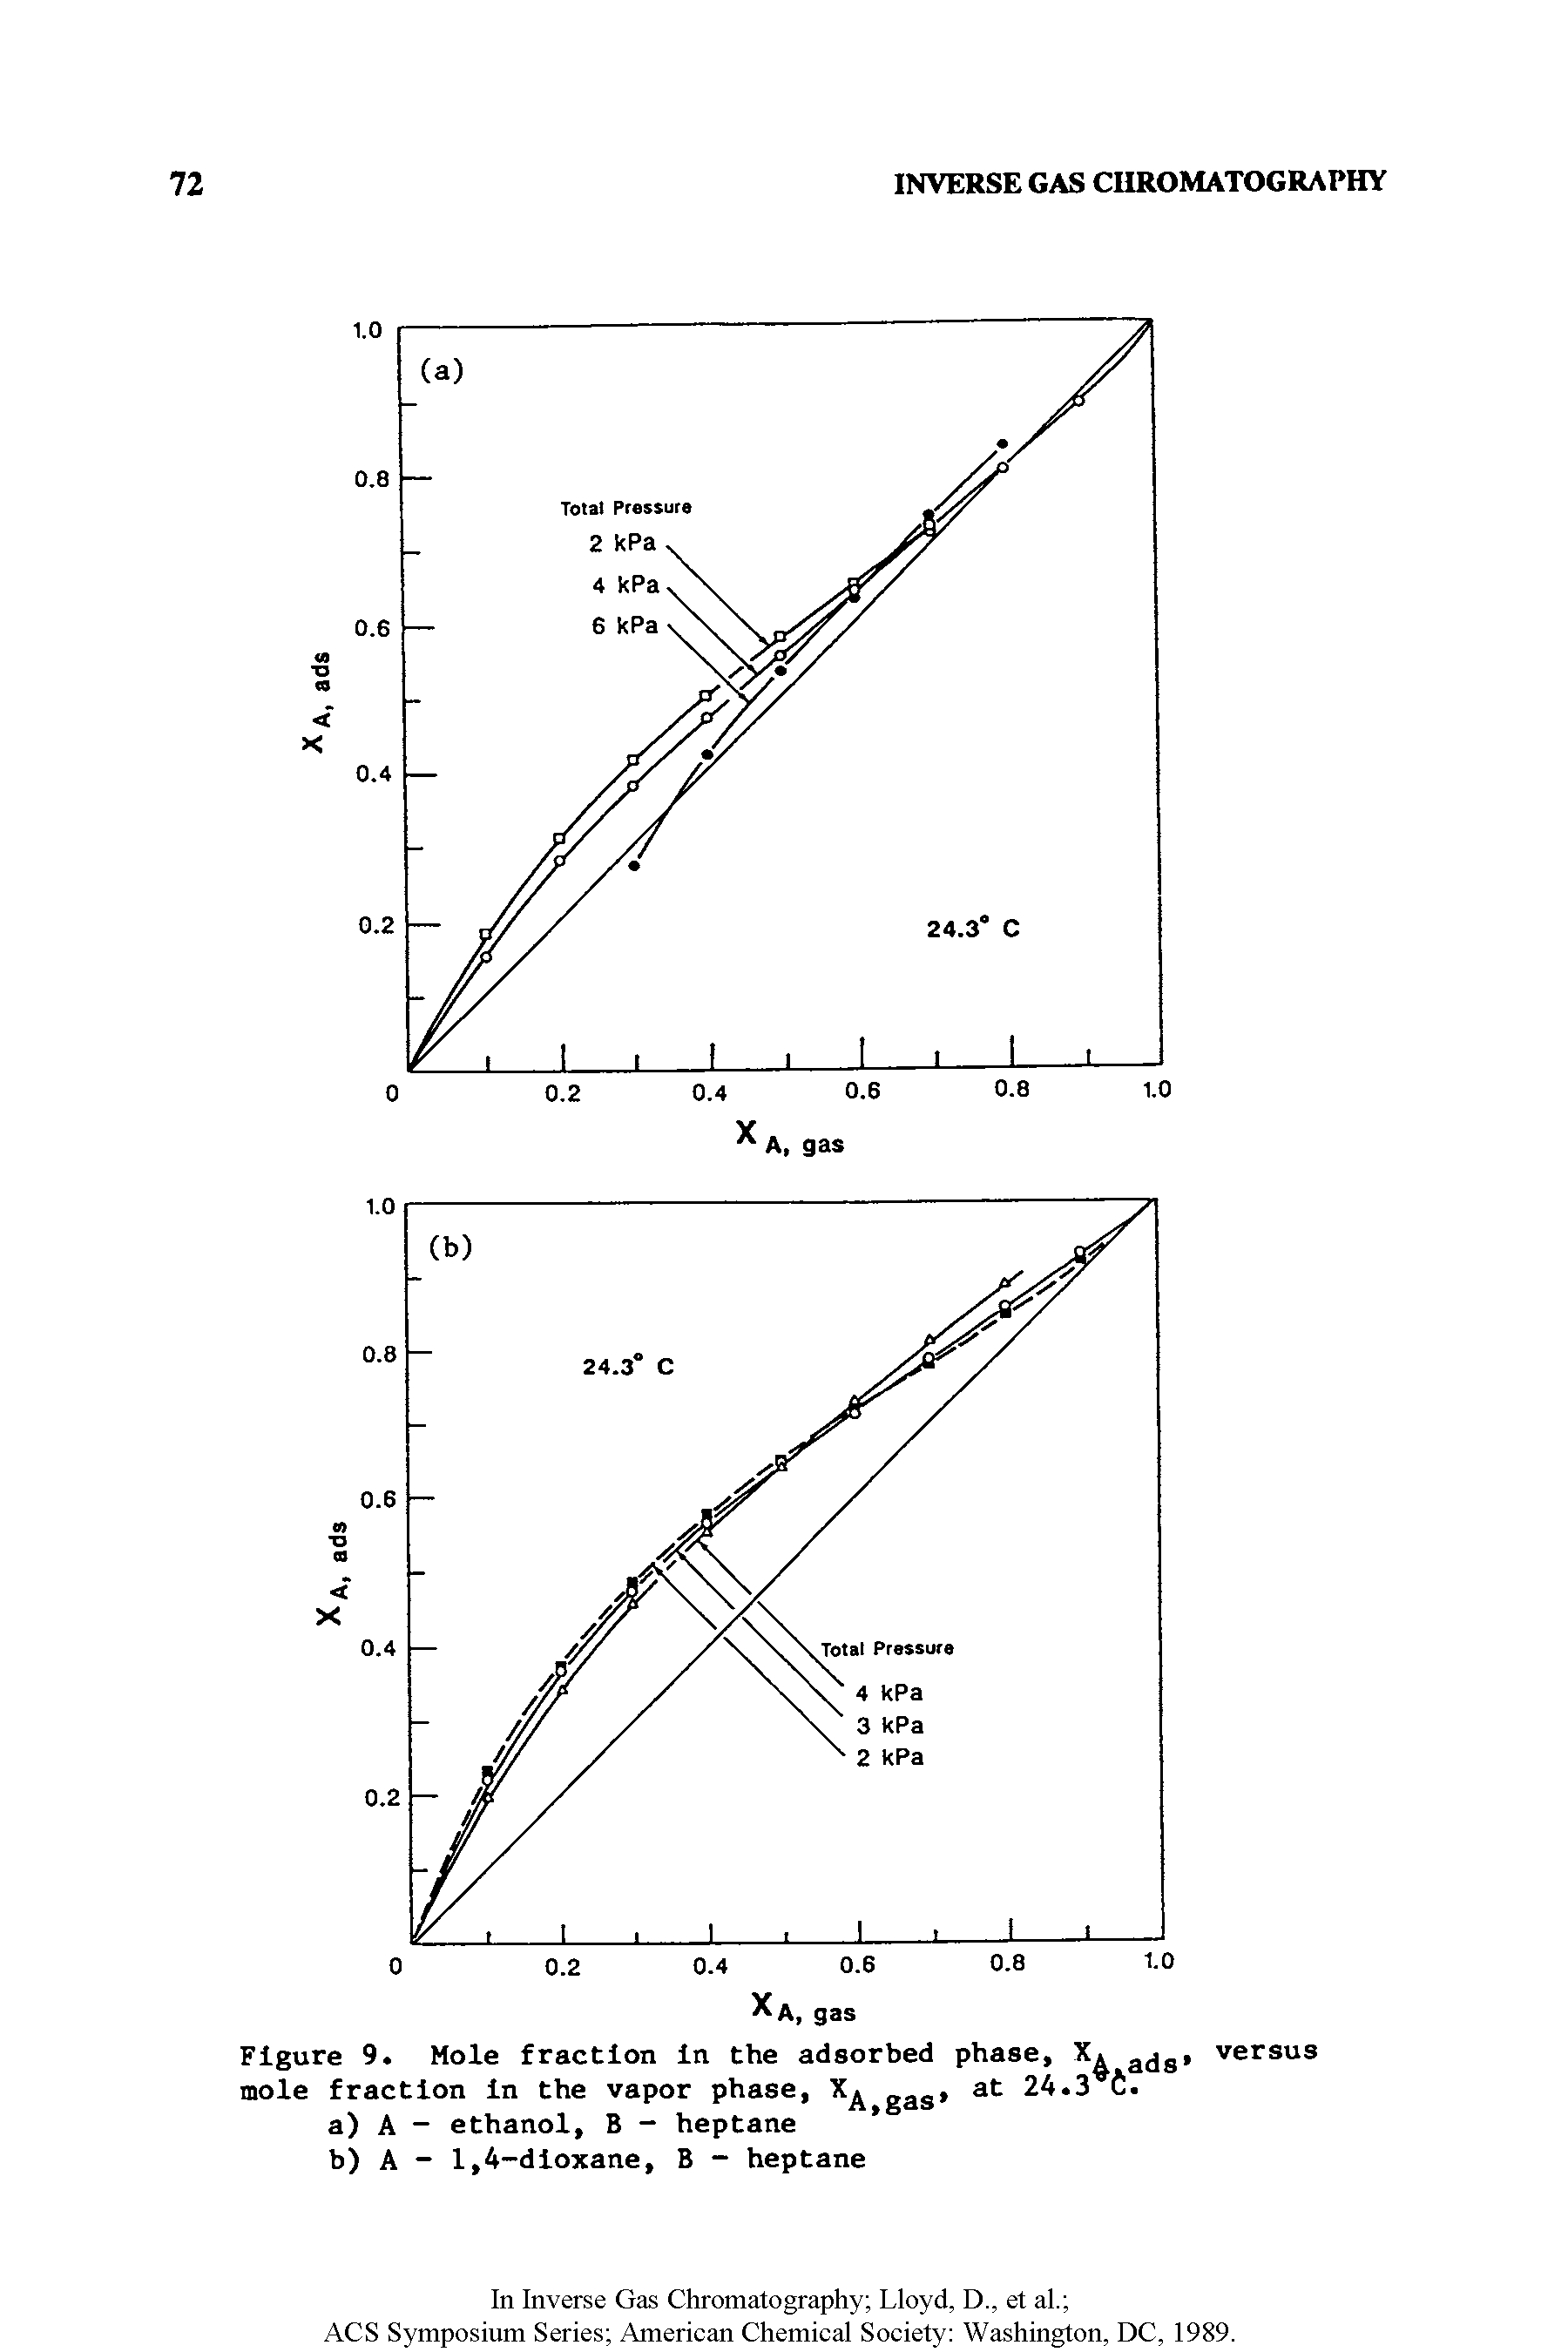 Figure 9. Mole fraction in the adsorbed phase, X a<js mole fraction in the vapor phase, X gas at 24.3 4.